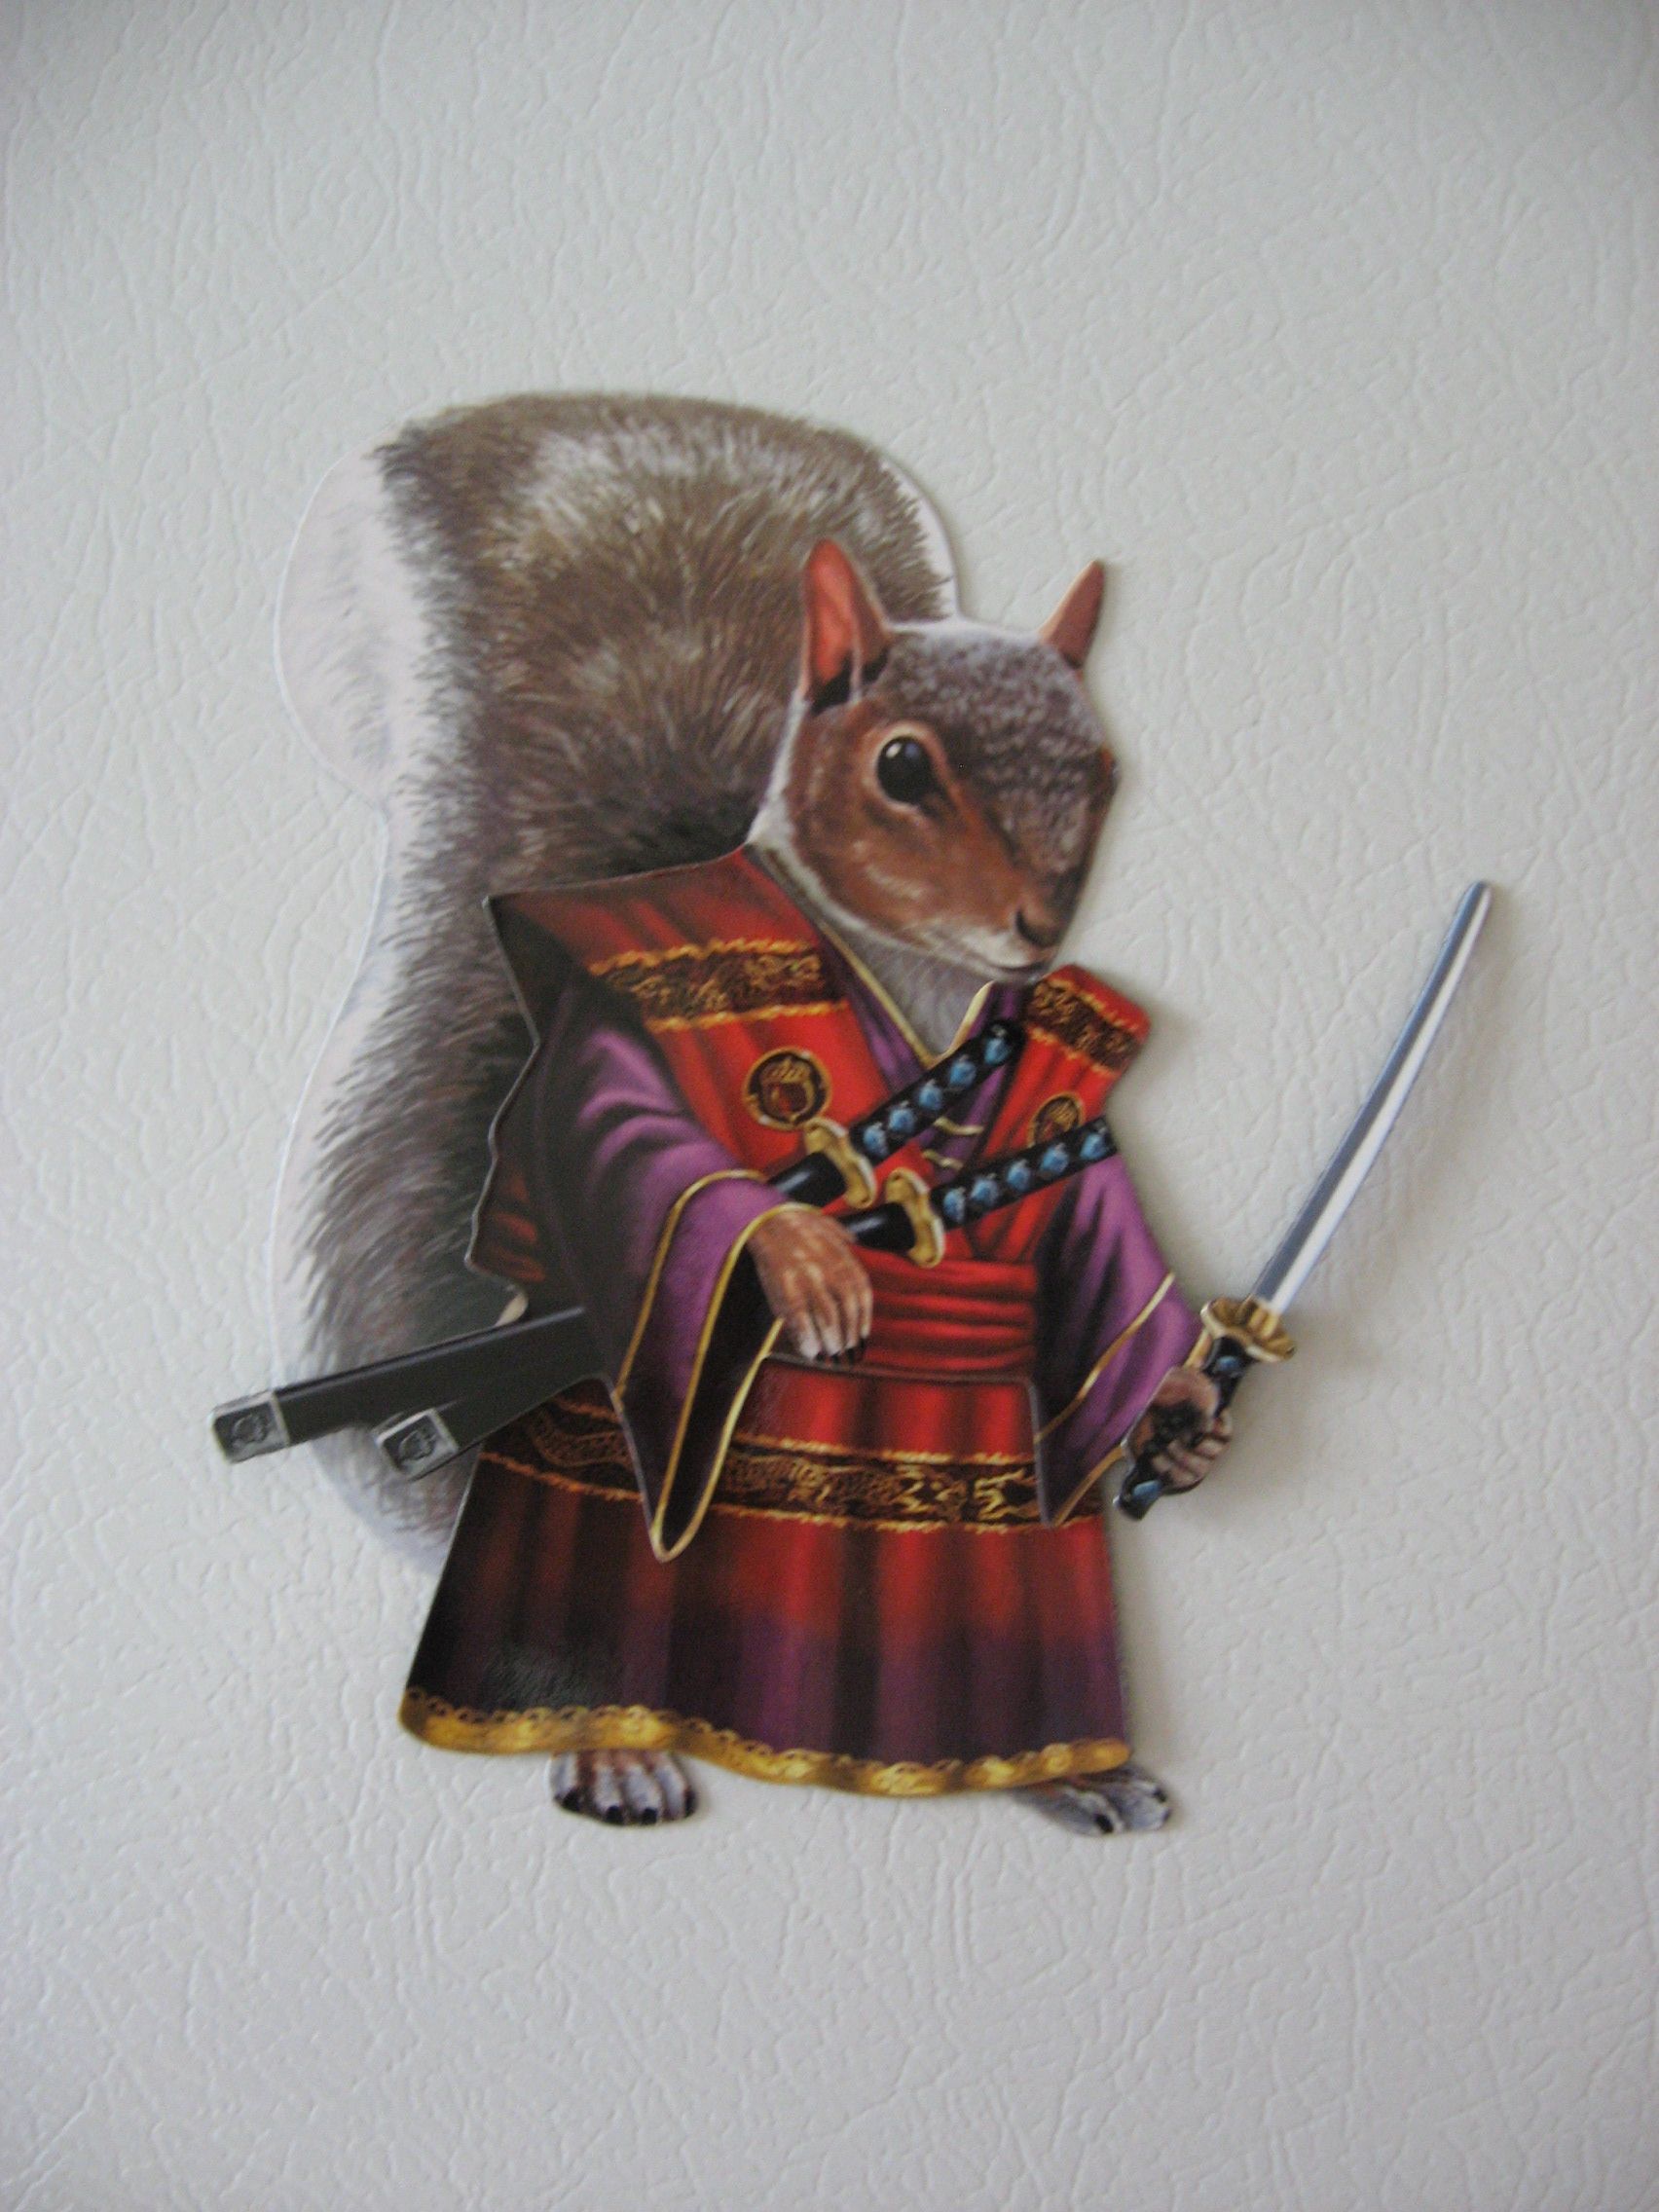 picture of a squirrel in samurai clothing and a sword